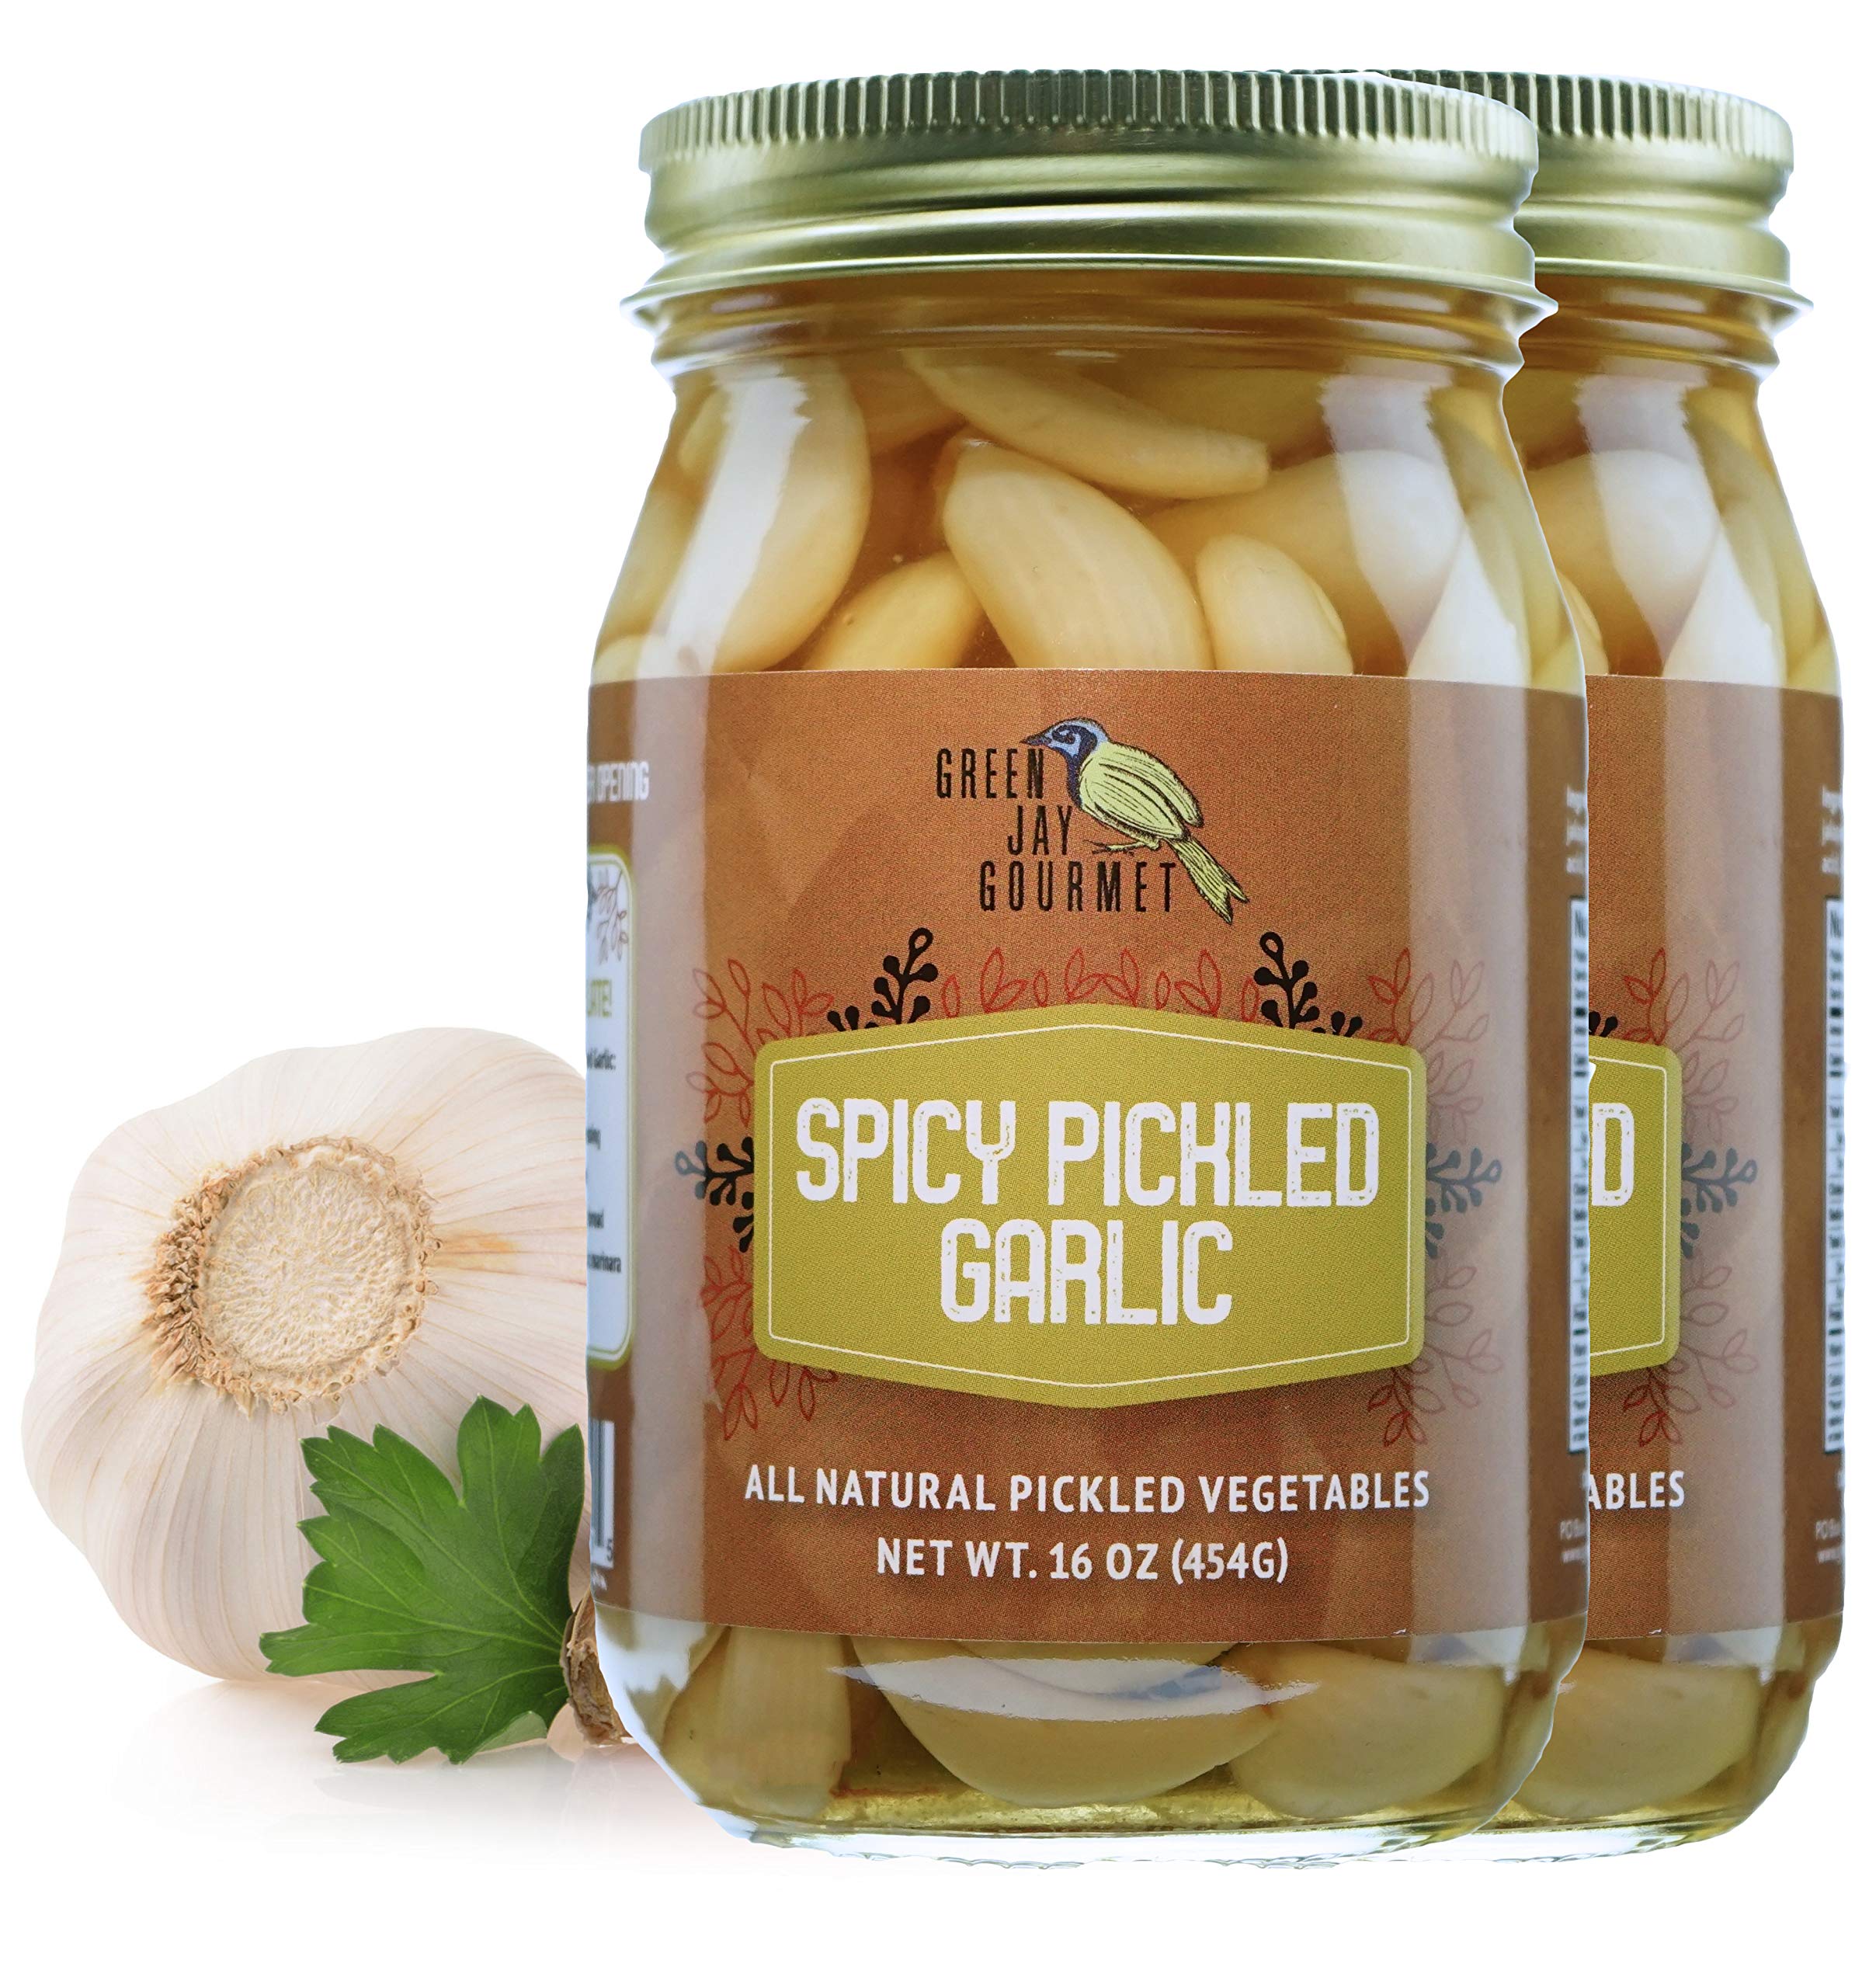 Green Jay Gourmet Pickled Garlic Cloves in a Jar - Spicy Pickled Garlic - Fresh Garlic Bulbs for Cooking - Simple, Natural Ingredients - Freshly Ma...